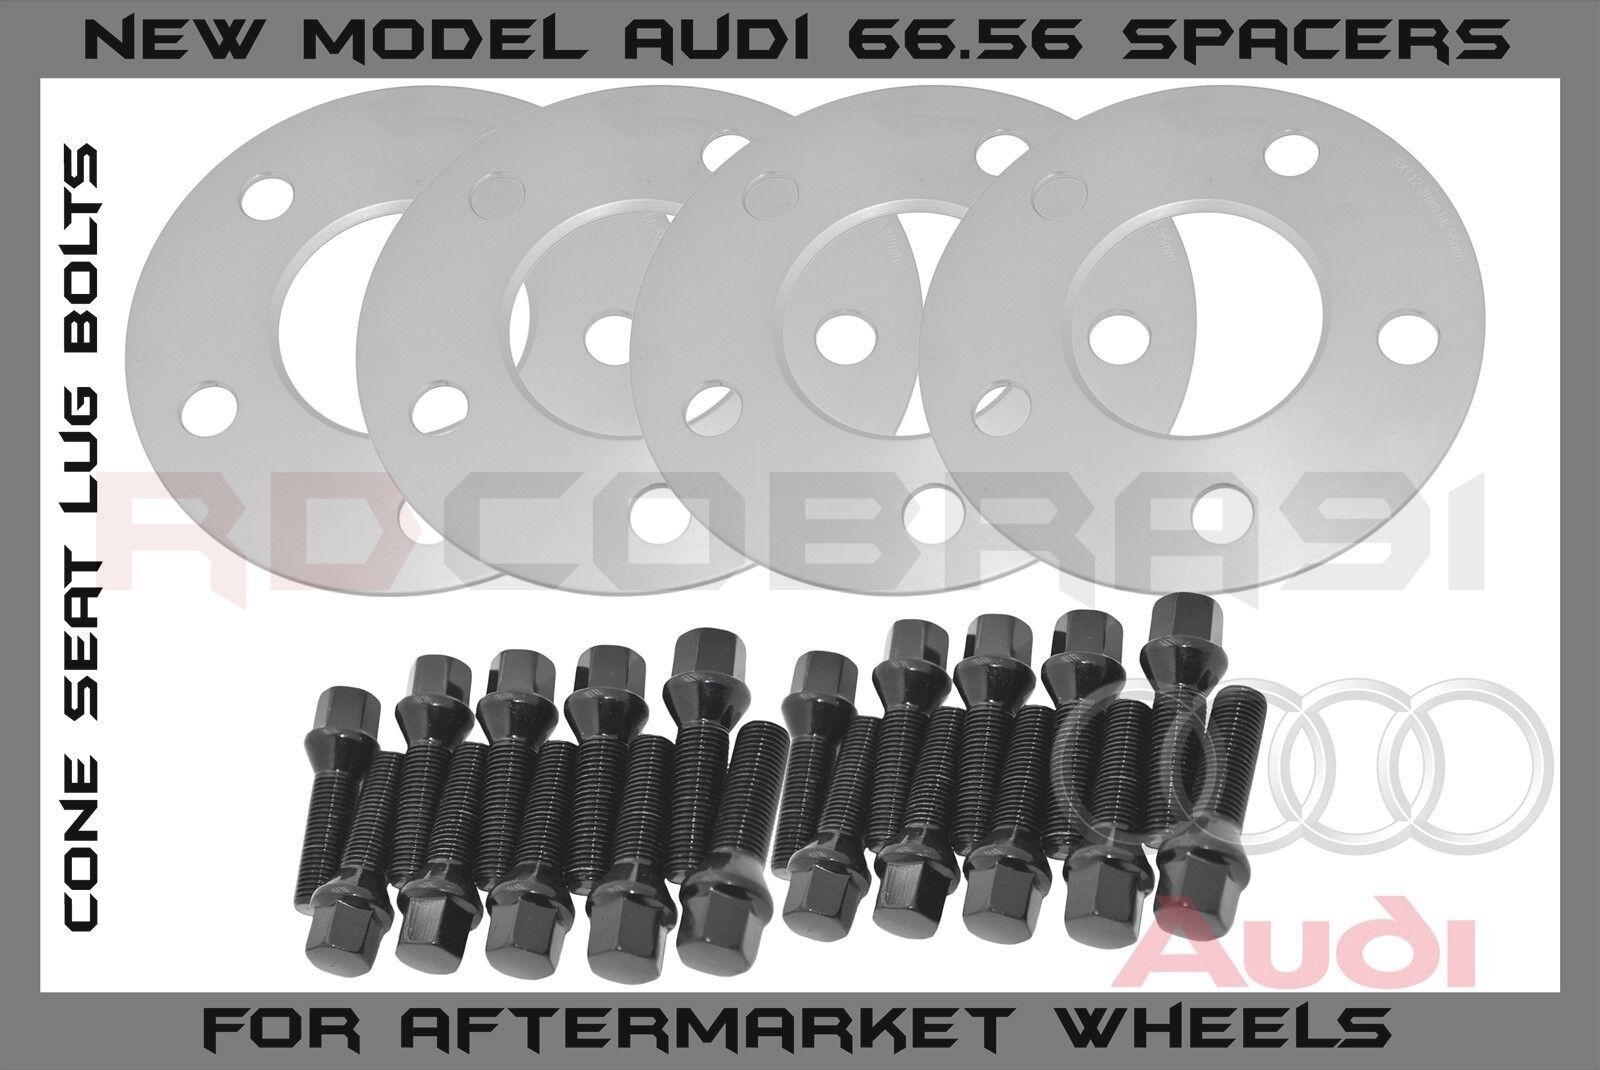 4X 5mm Hub Centric Wheel Spacers 66.56 | 5x112 | Ext. 14x1.5 Cone Seat Lug Bolts